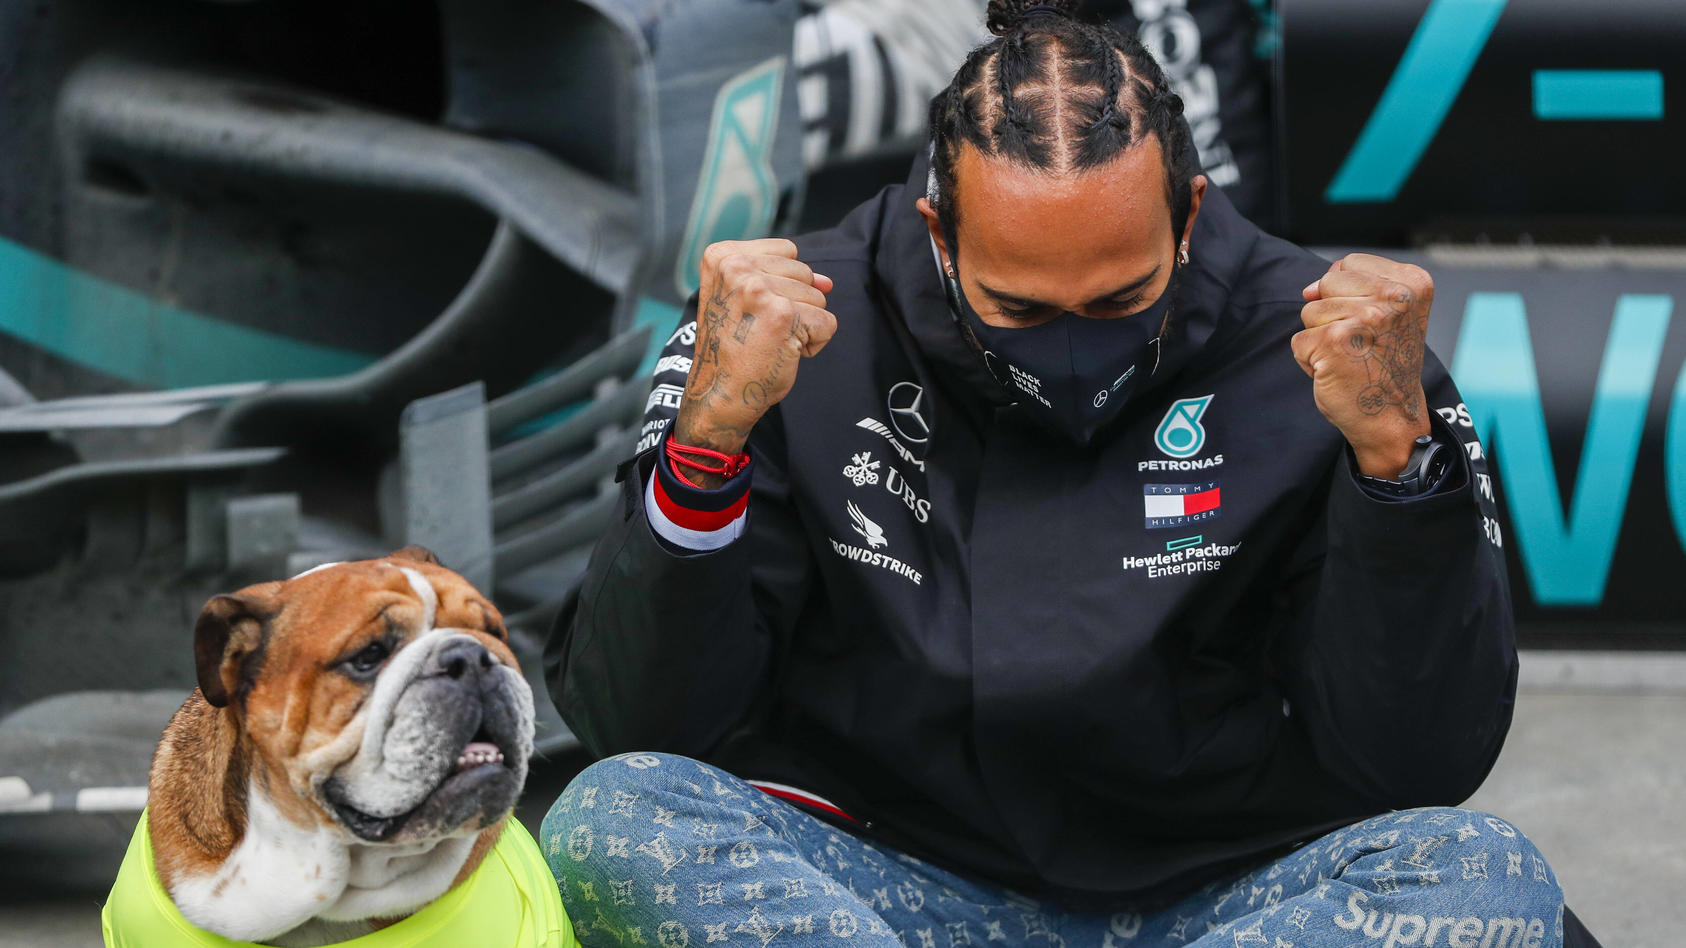  2020 Turkish GP ISTANBUL PARK, TURKEY - NOVEMBER 15: Lewis Hamilton, Mercedes-AMG Petronas F1, 1st position, his dog Roscoe, and the Mercedes team celebrate after having secured a seventh world drivers championship title during the Turkish GP at Ist